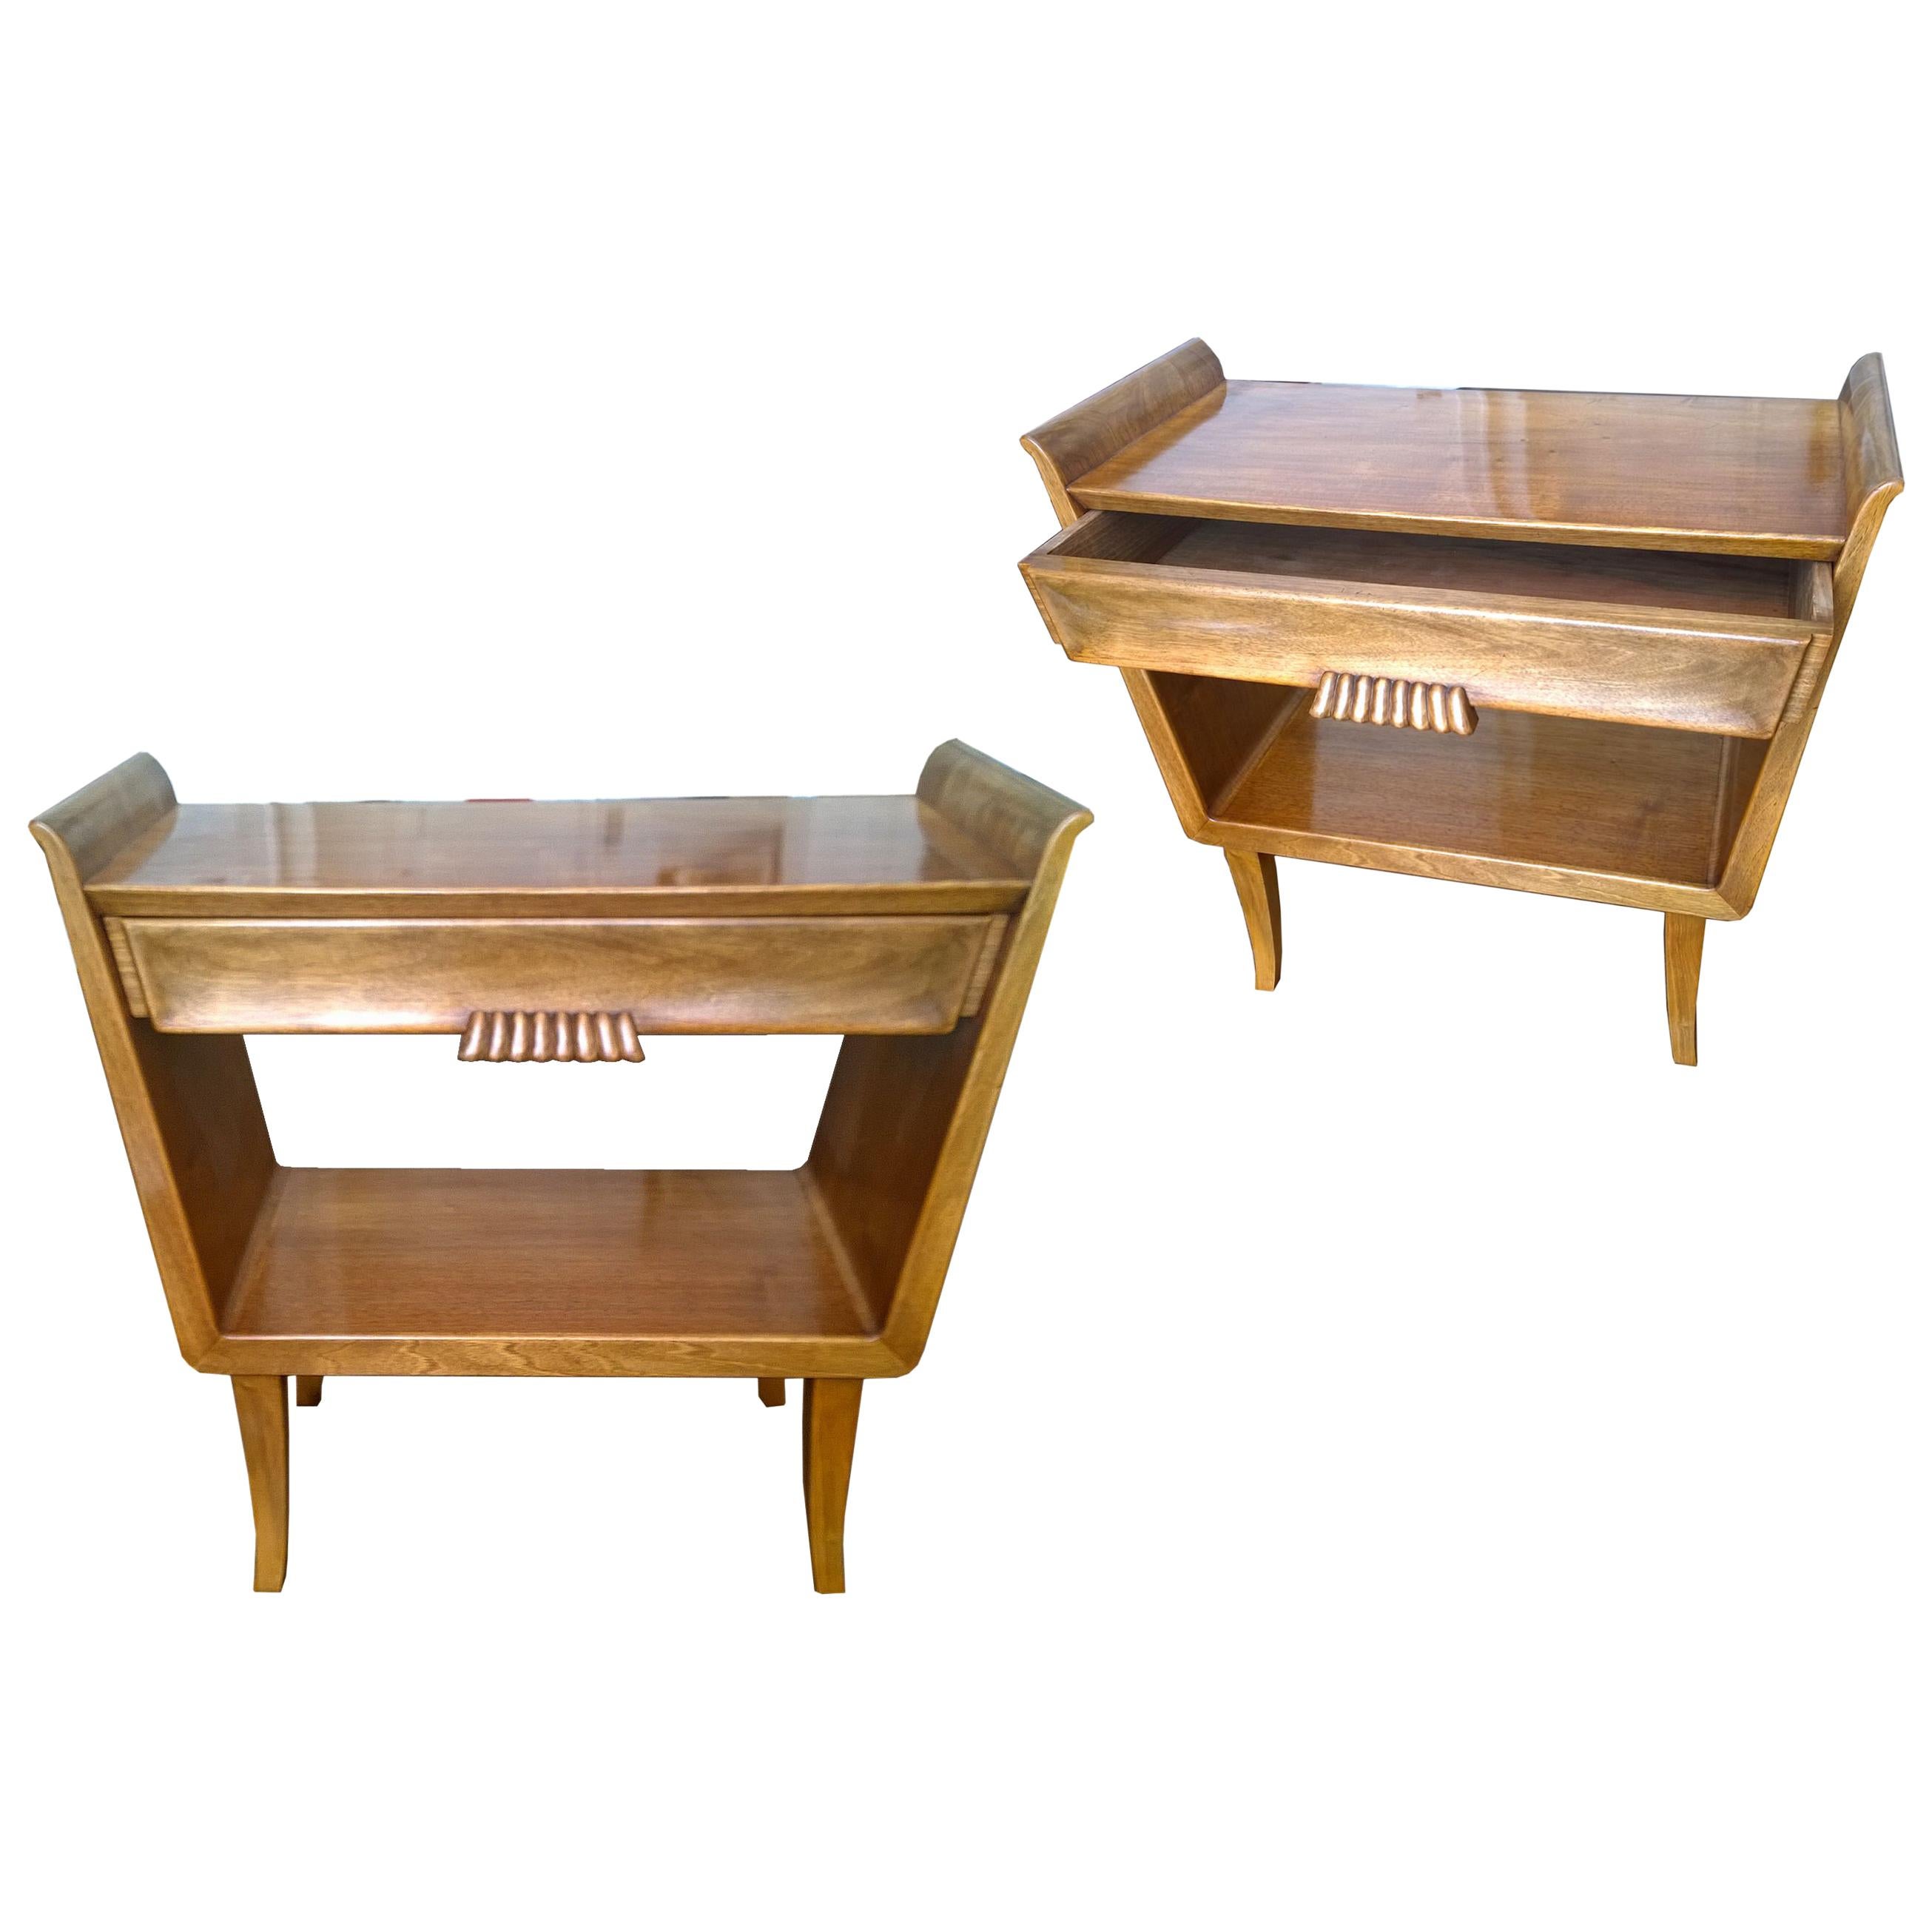 Pair of Italian Mid-Century Modern Fruit Wood Bedside Tables or Cabinets, 1960s